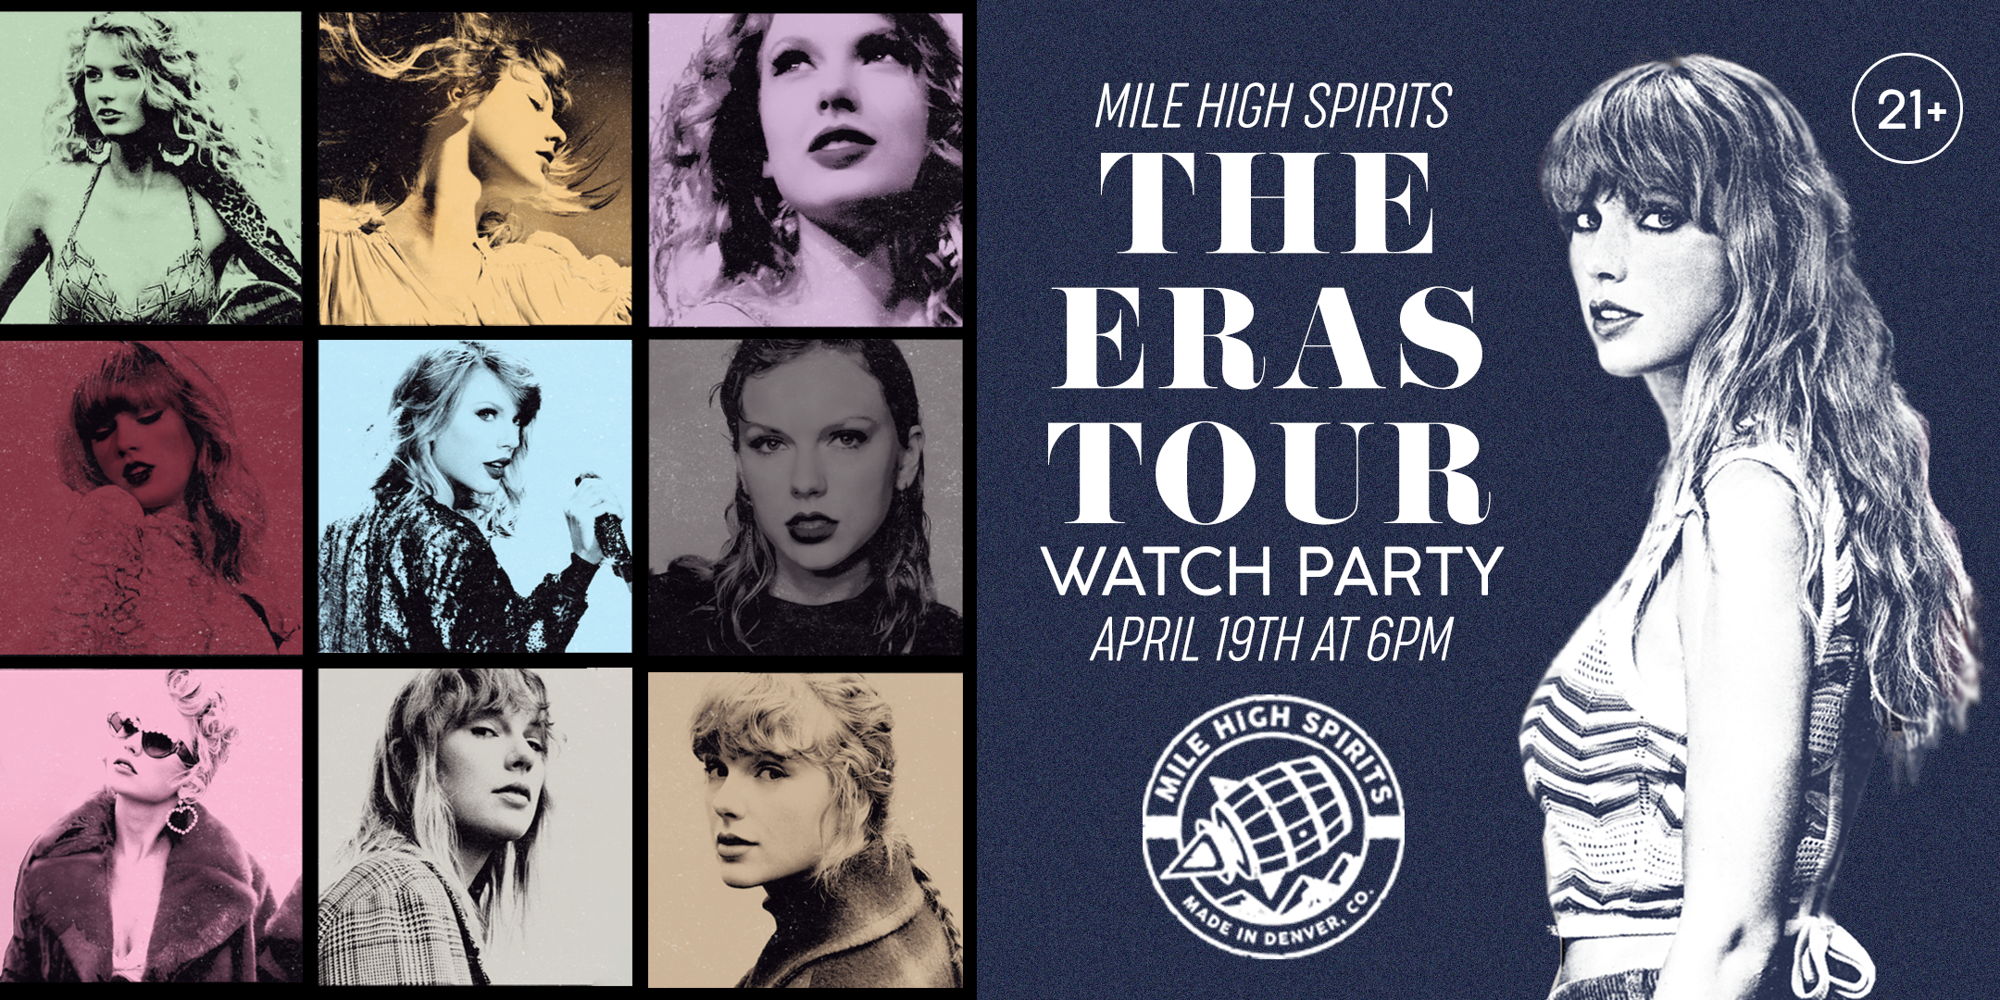 THE ERAS TOUR WATCH PARTY at Mile High Spirits promotional image